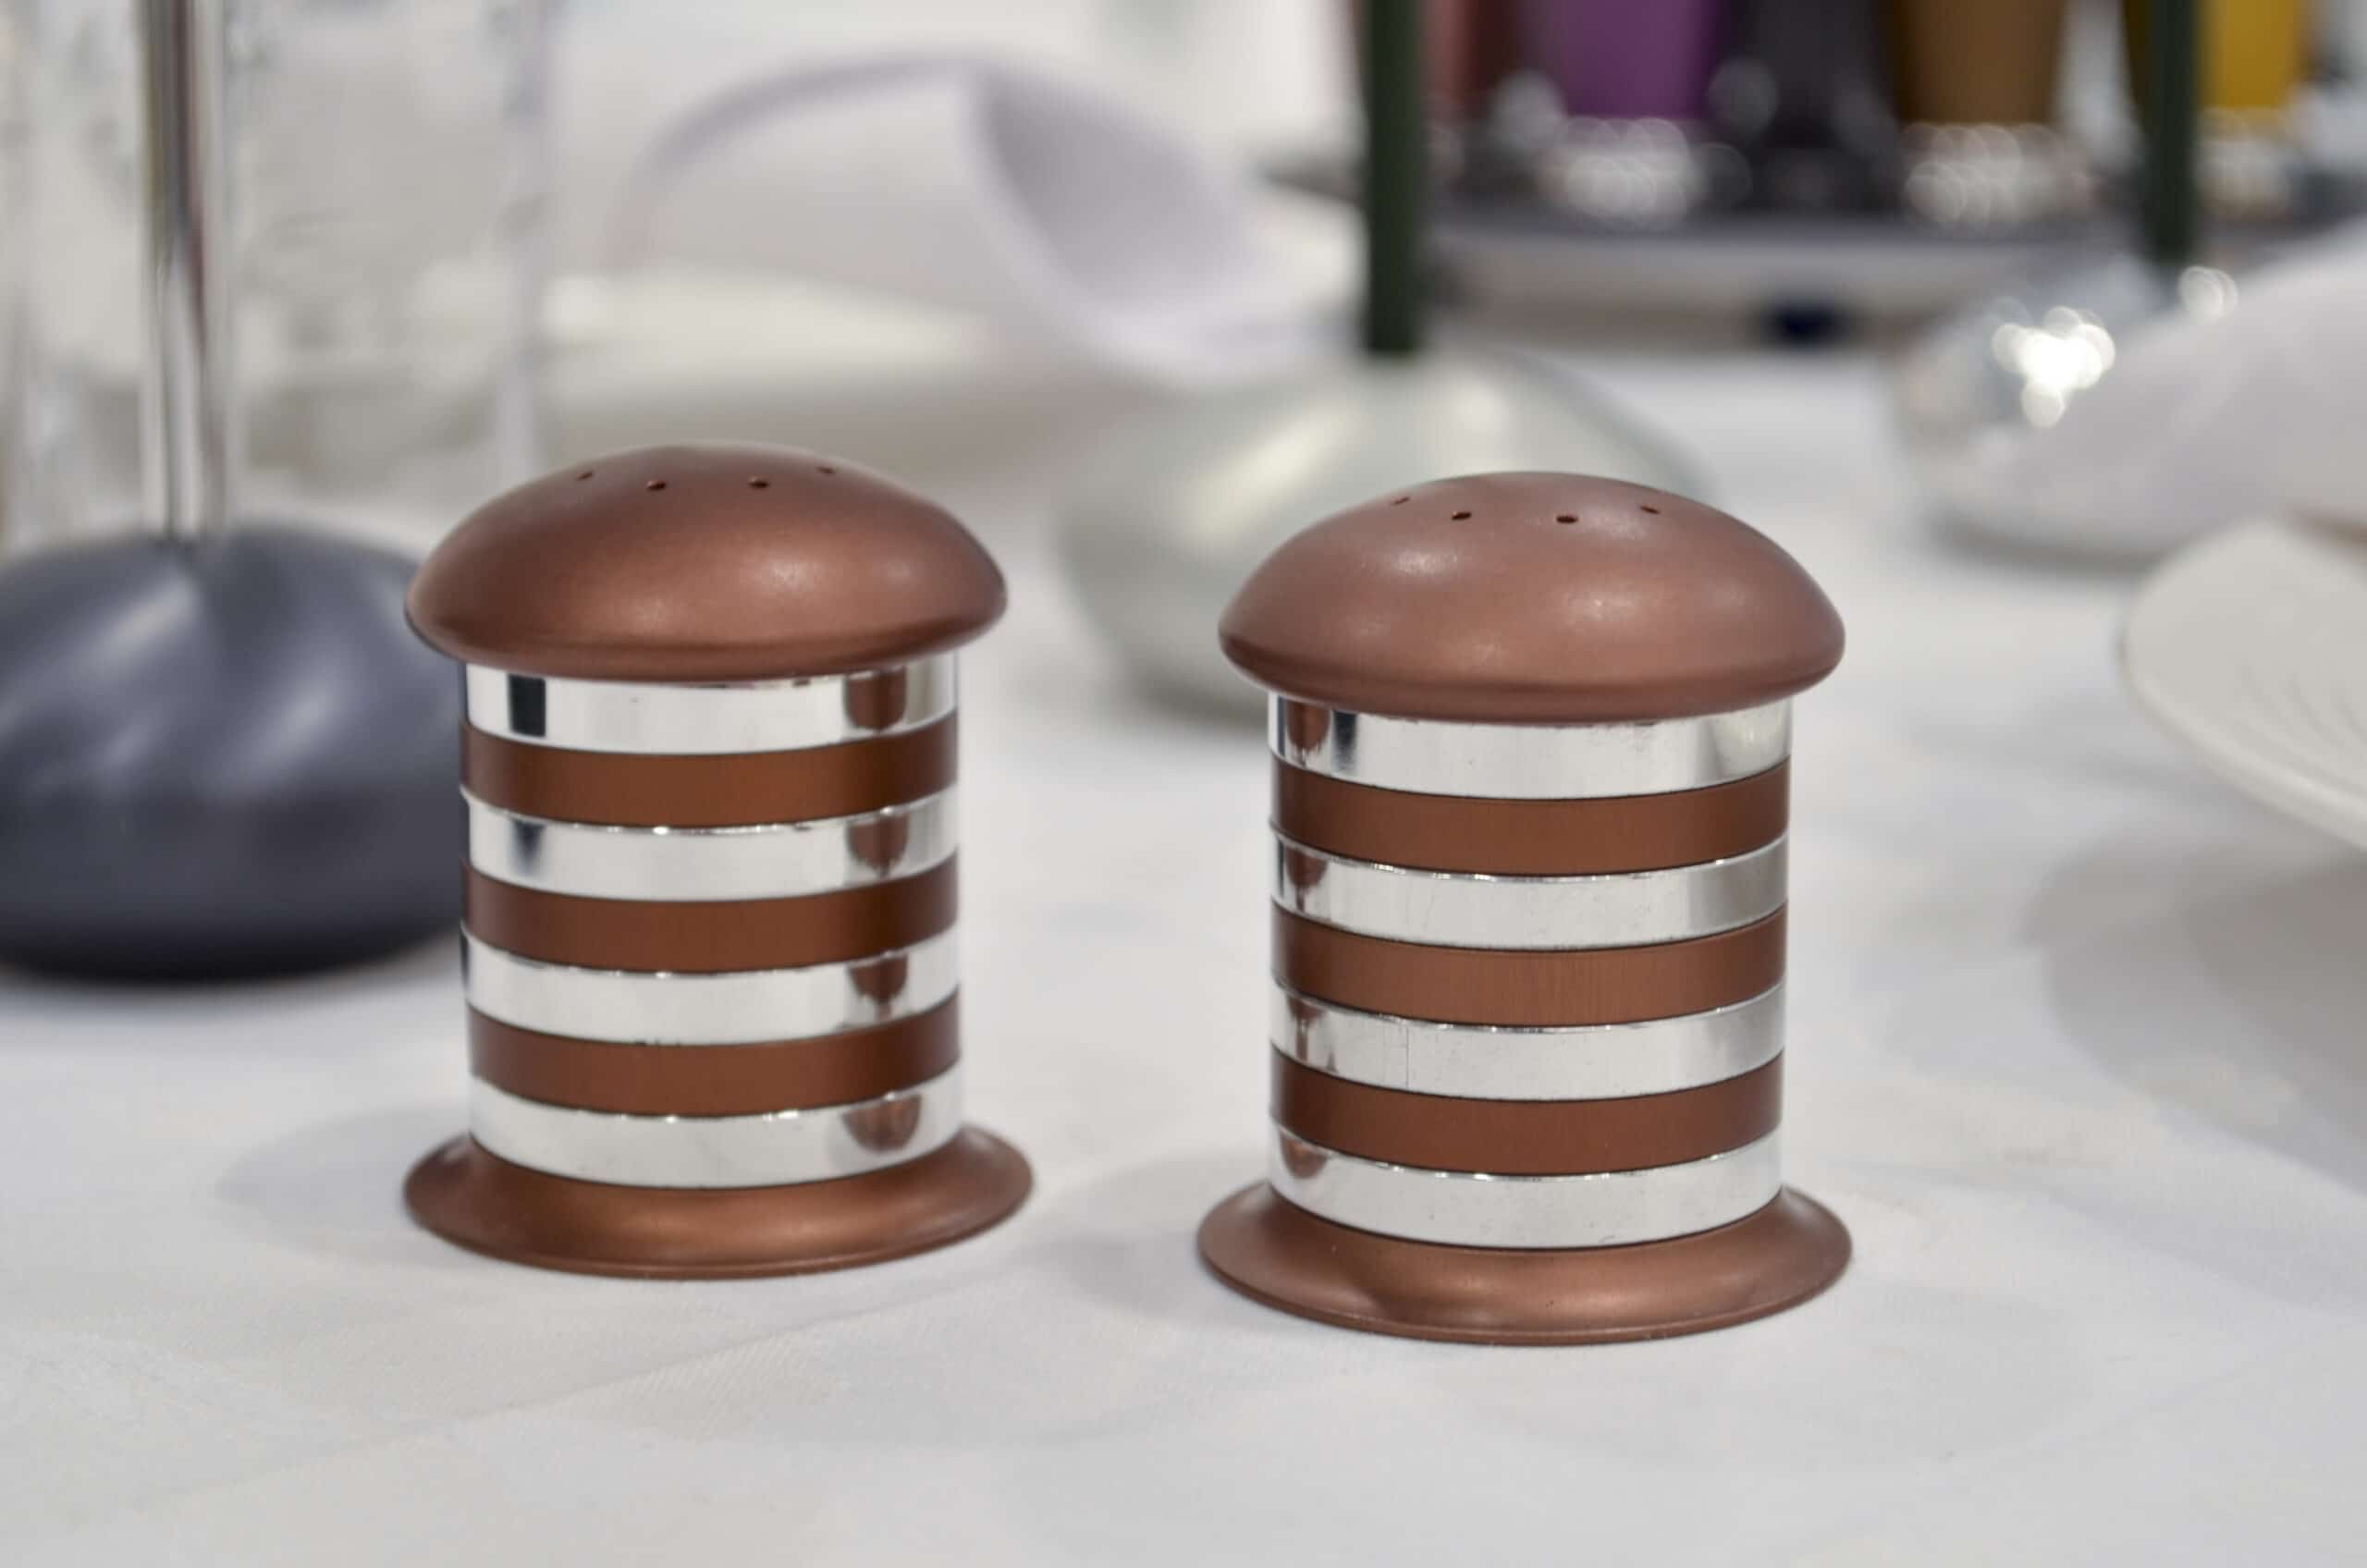 Salt & Pepper Shakers with Shiny Finish